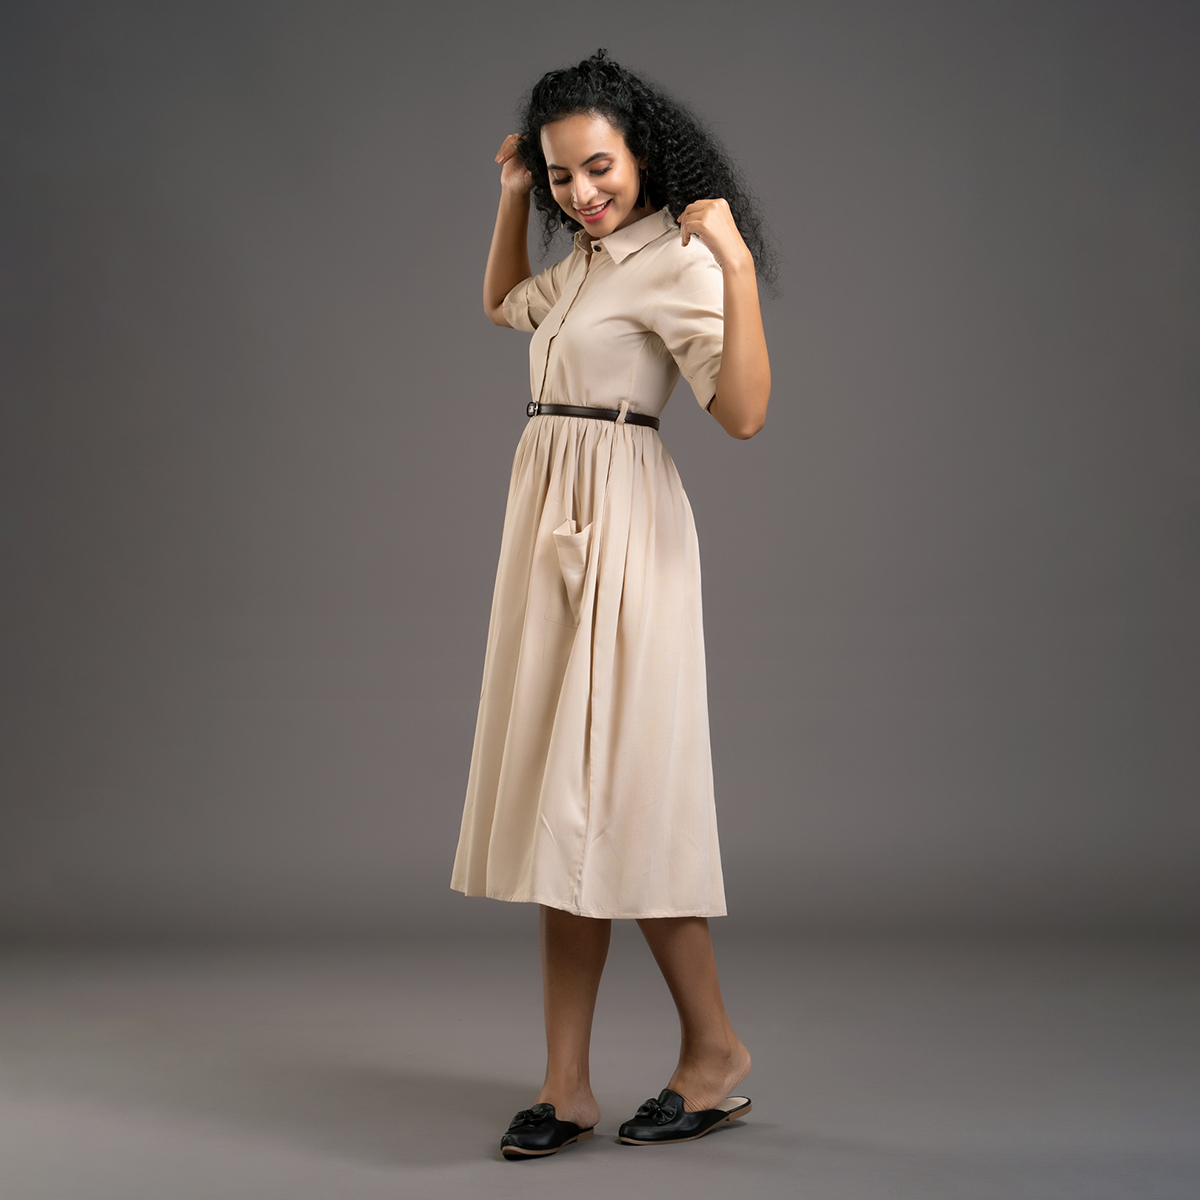 Zella Solid Color Shirt Midi Dress styled with Patch Pockets & Waist belt - Lt.Chikoo